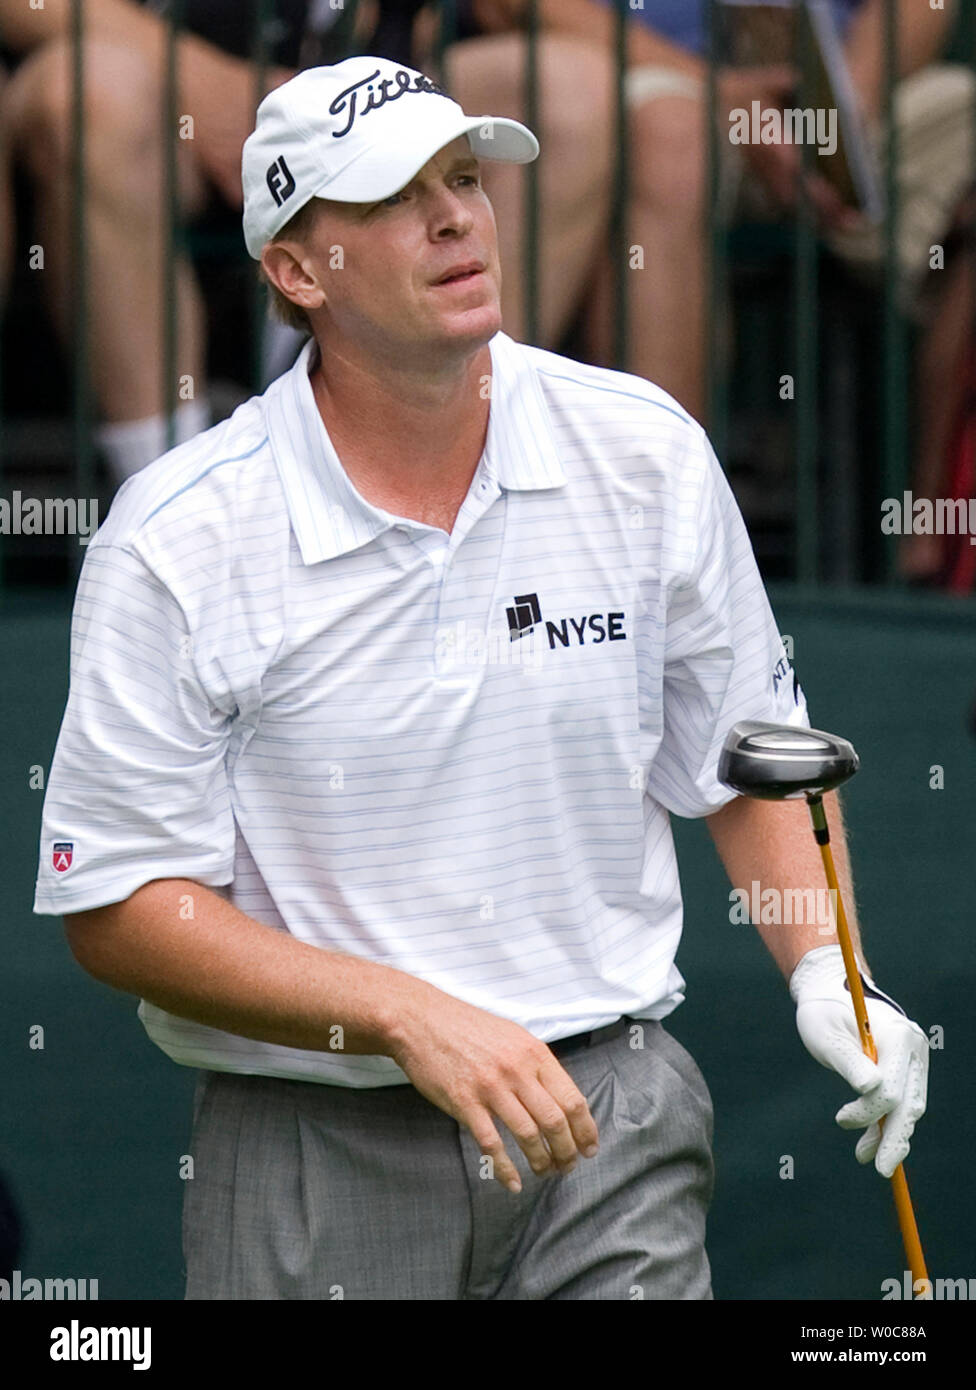 Steve Stricker watches his drive off the 1st tee box during the final round at the AT&T National hosted by Tiger Woods at the Congressional Country Club in Potomac, Maryland  on July 6, 2008. (UPI Photo/Patrick D. McDermott) Stock Photo